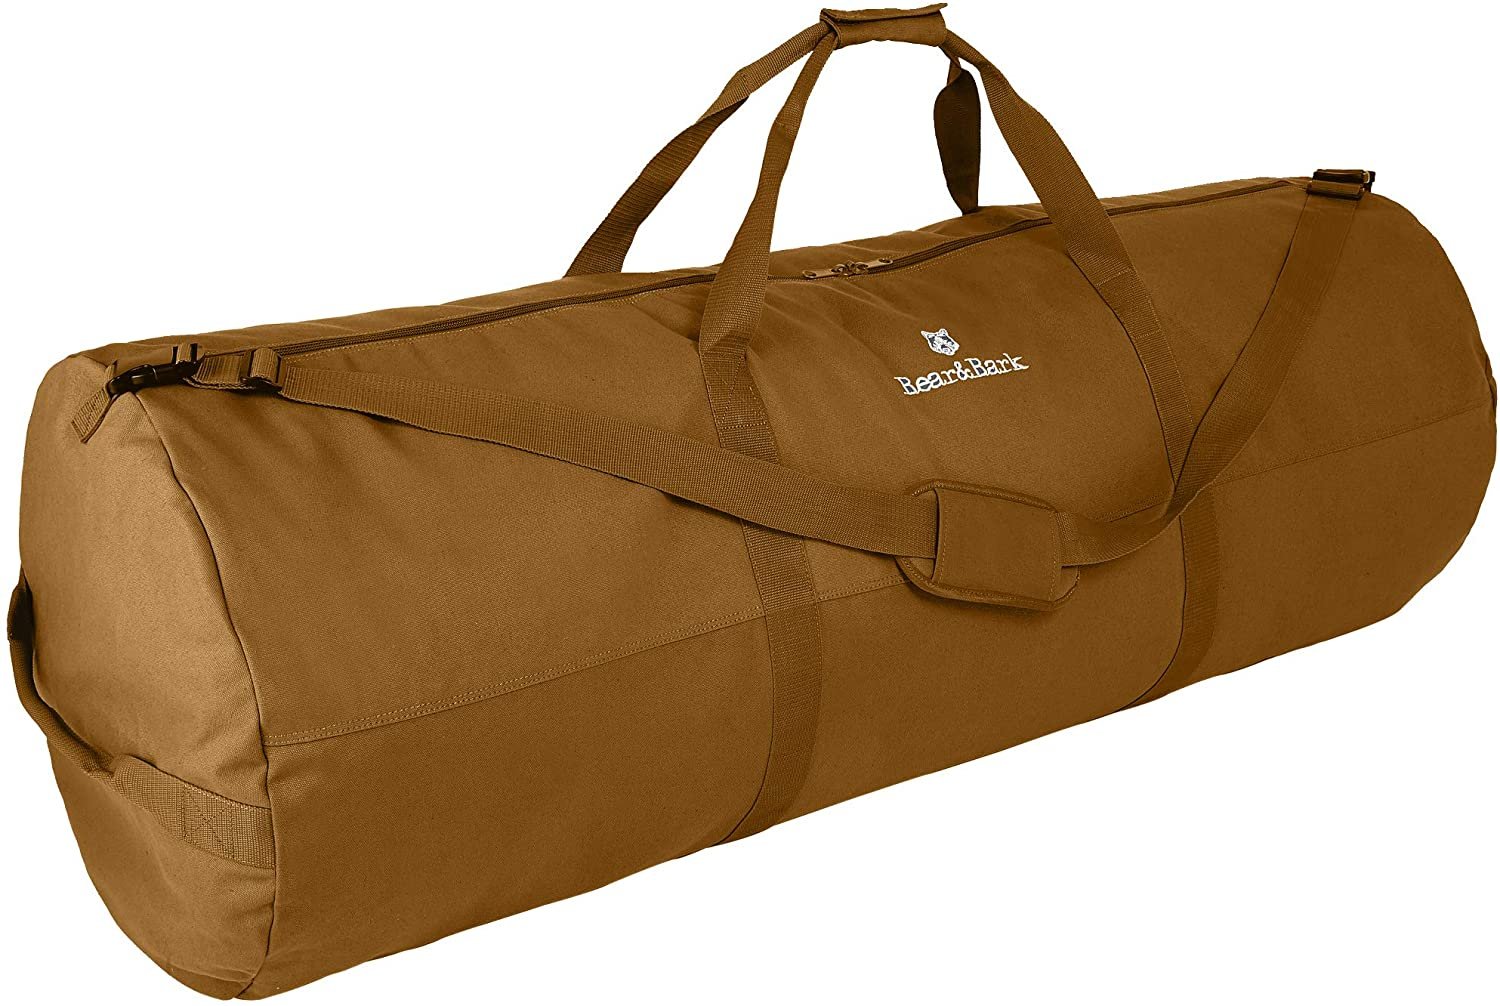 Large Blue Military Canvas Duffel Bag - 38x20 Army Cargo Style Carryall for Men & Women - Free Shipping